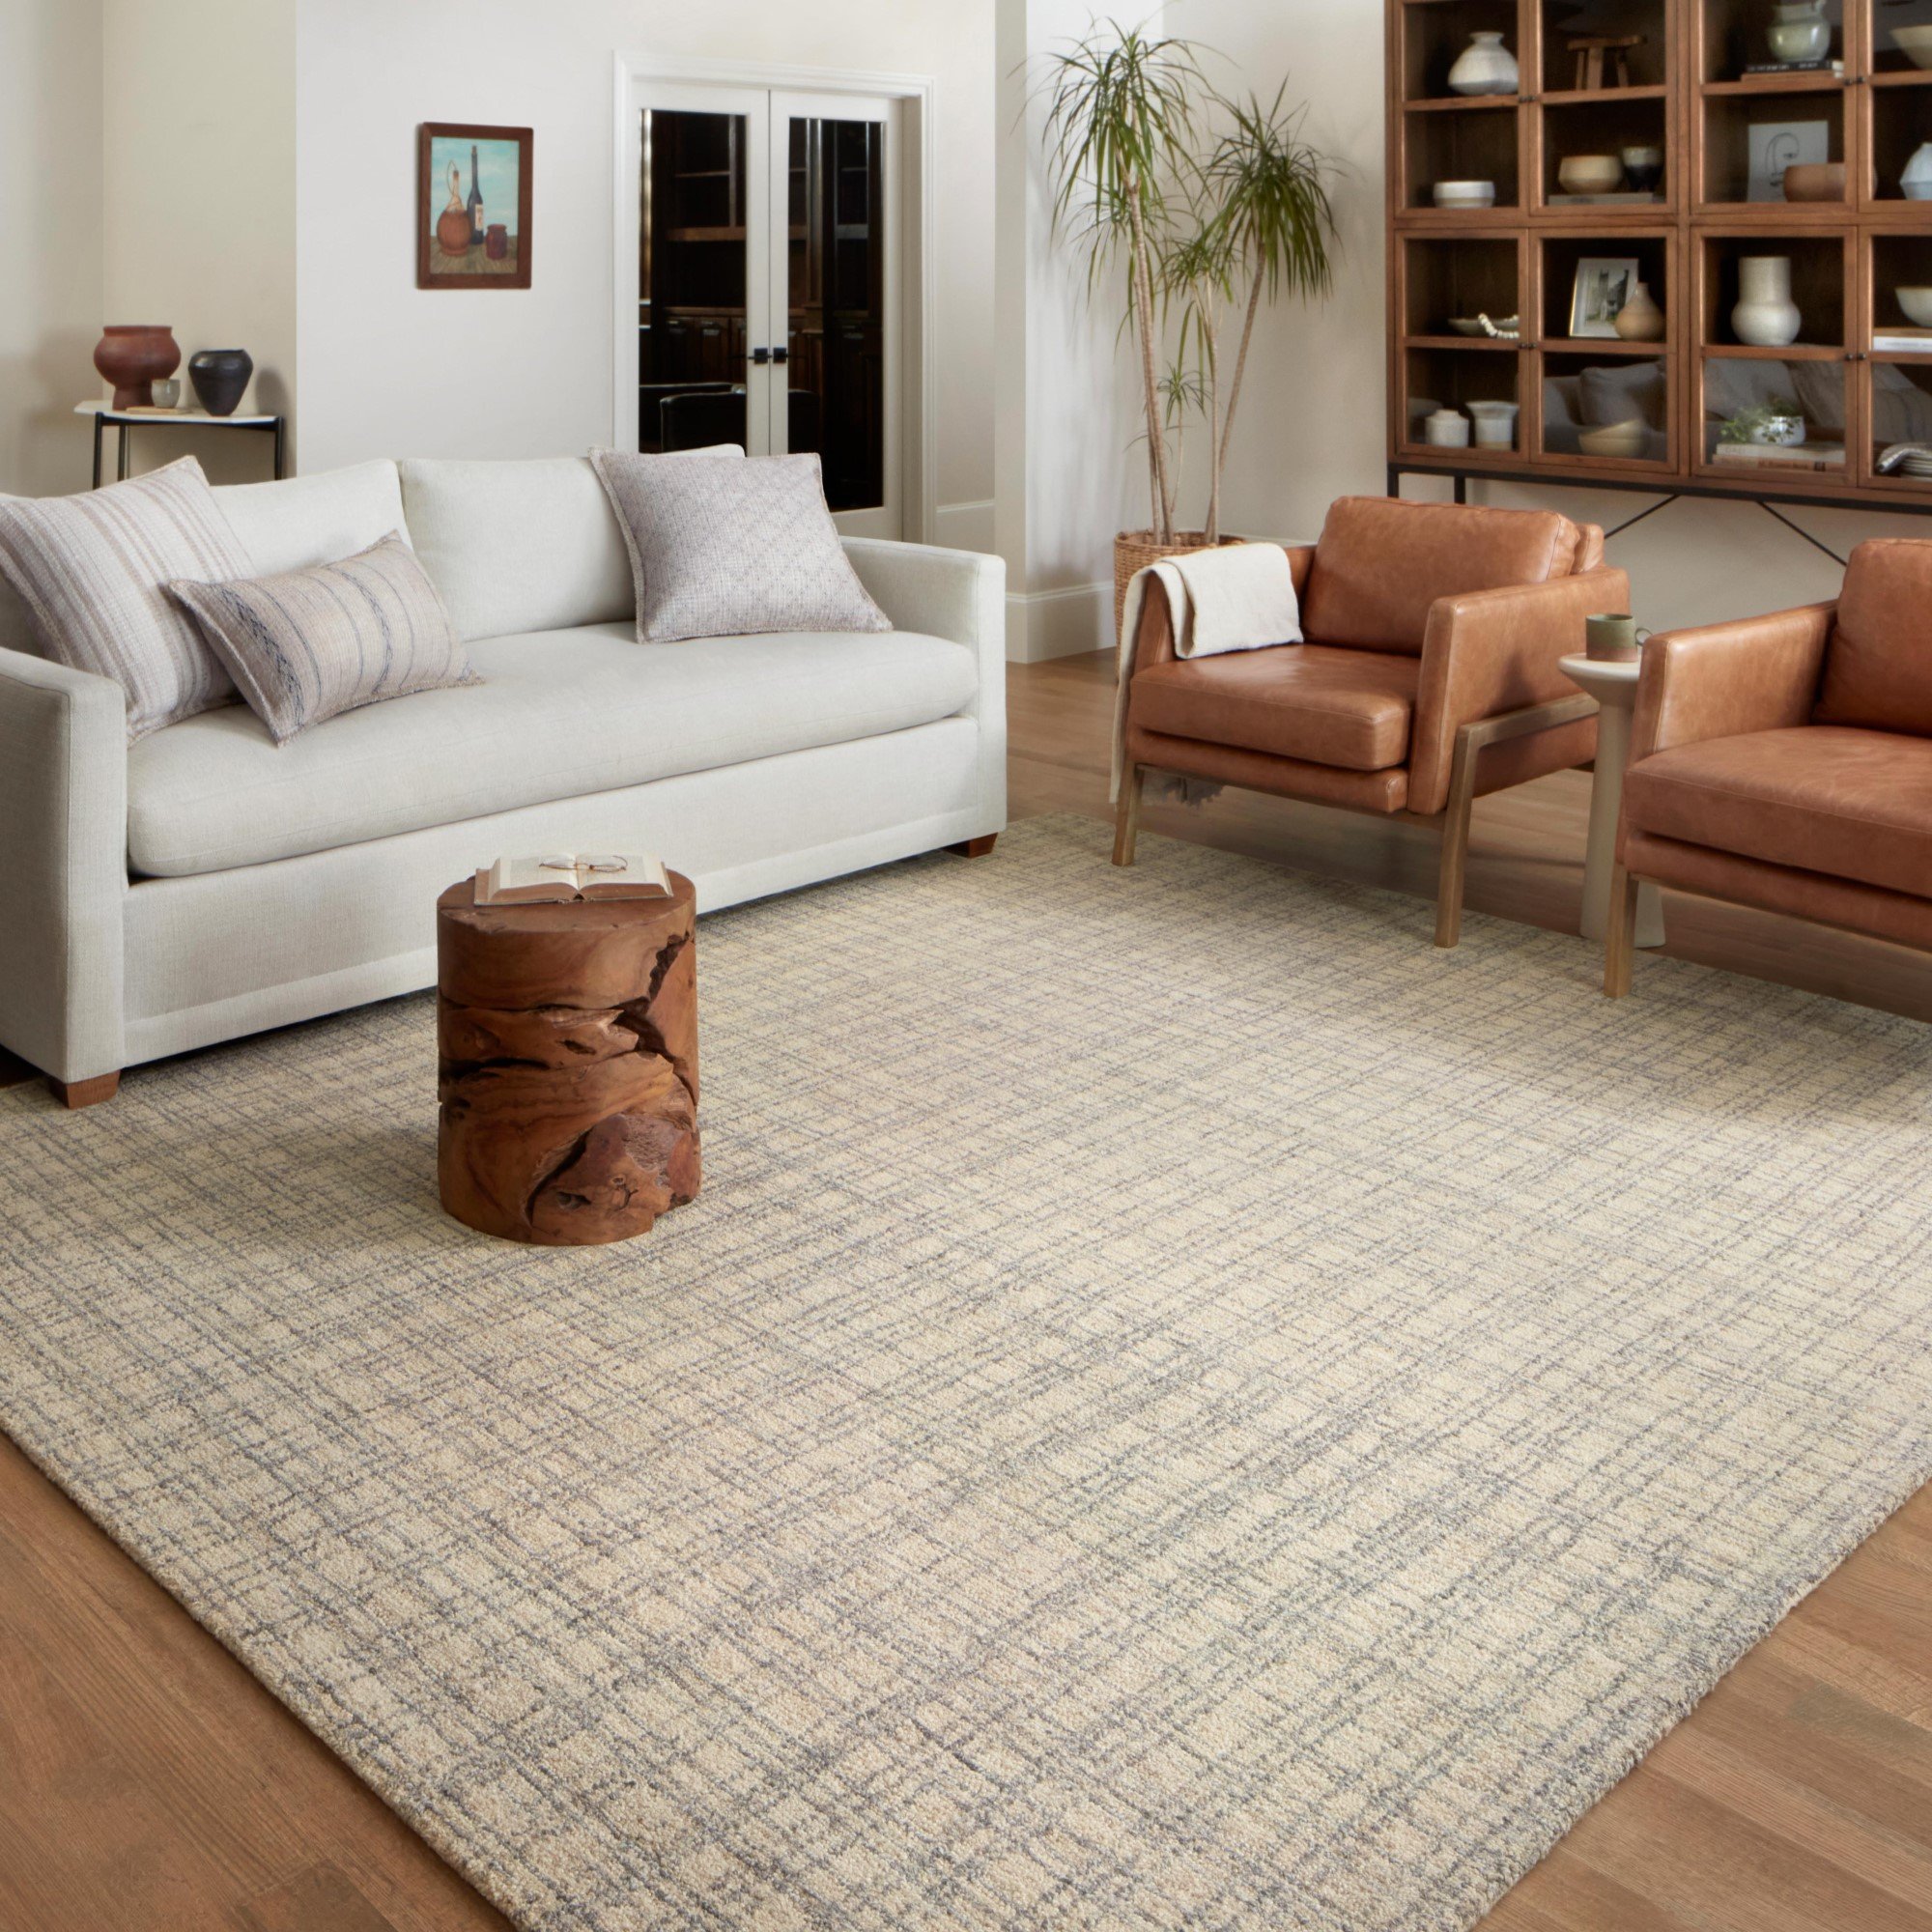 Poodle Area Rug and Runner: Explore a Variety of Custom Designs, Perso